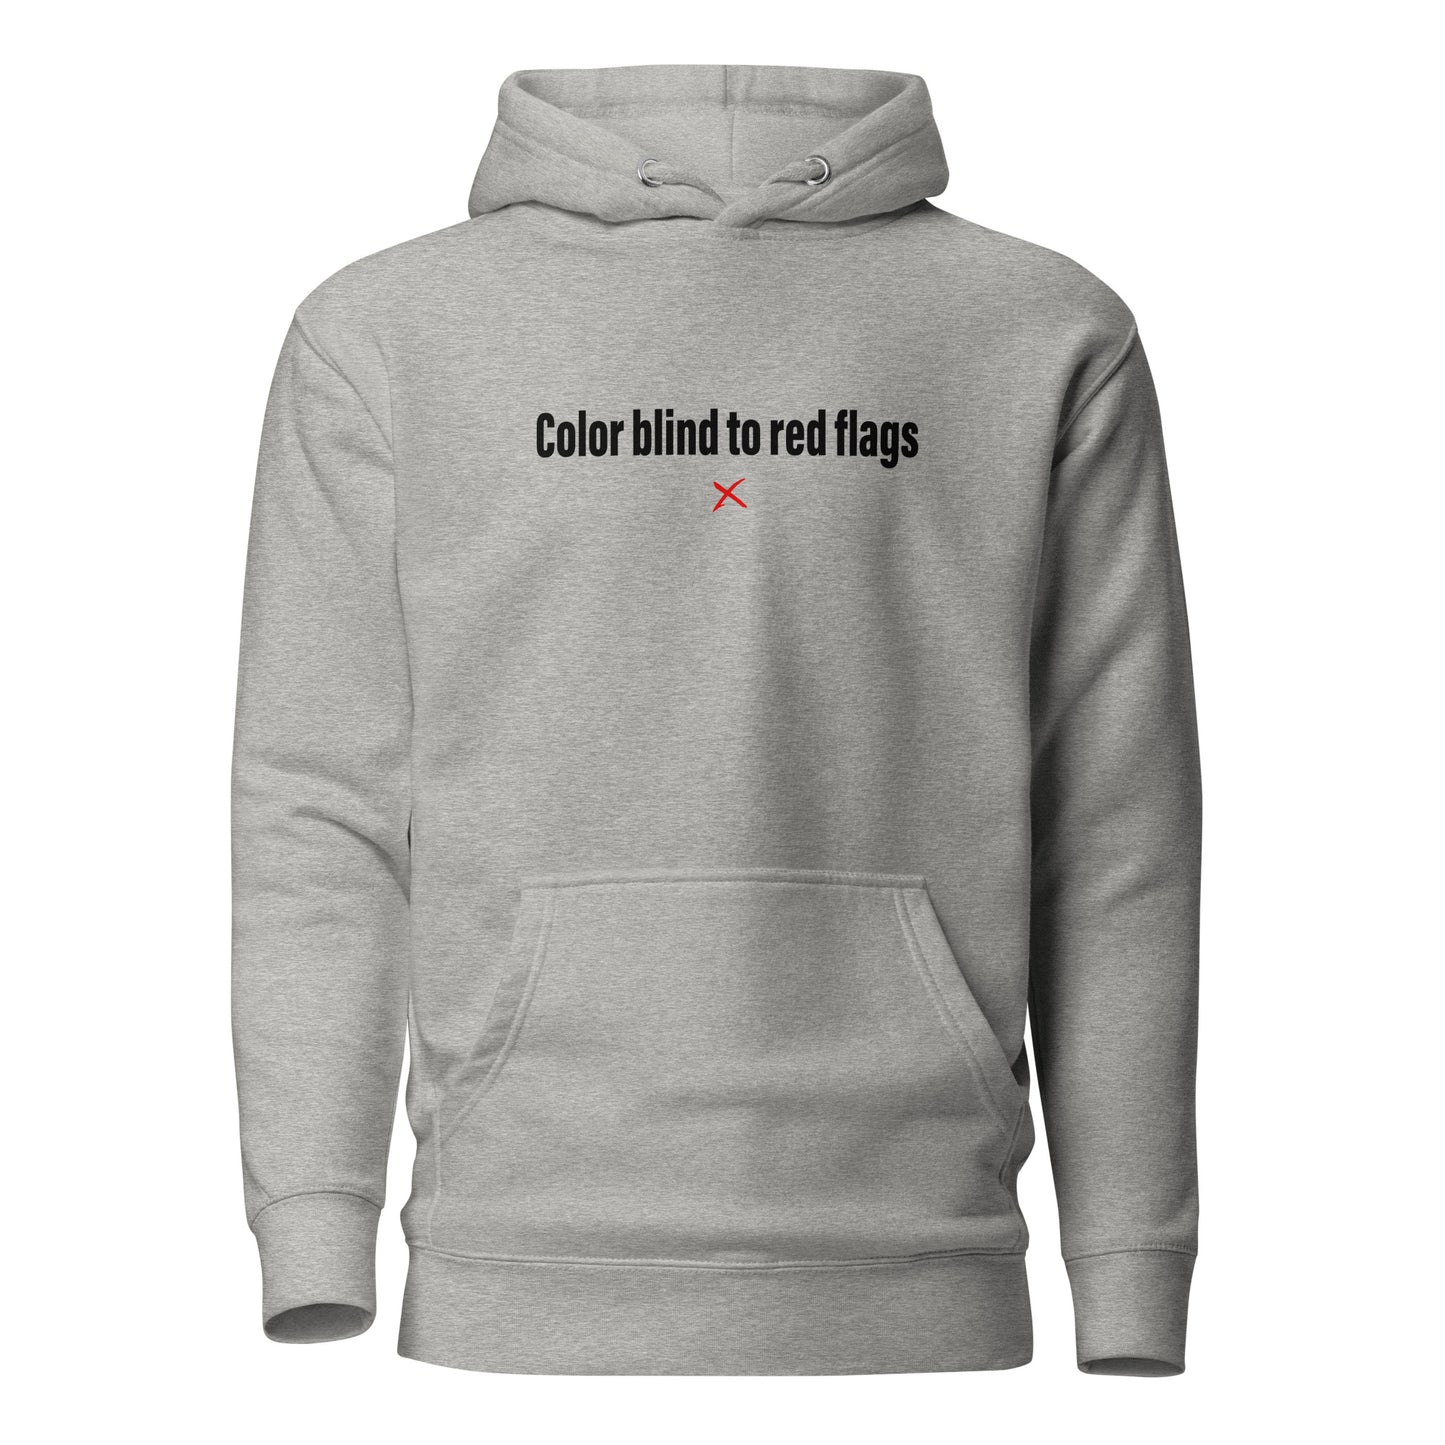 Color blind to red flags - Hoodie